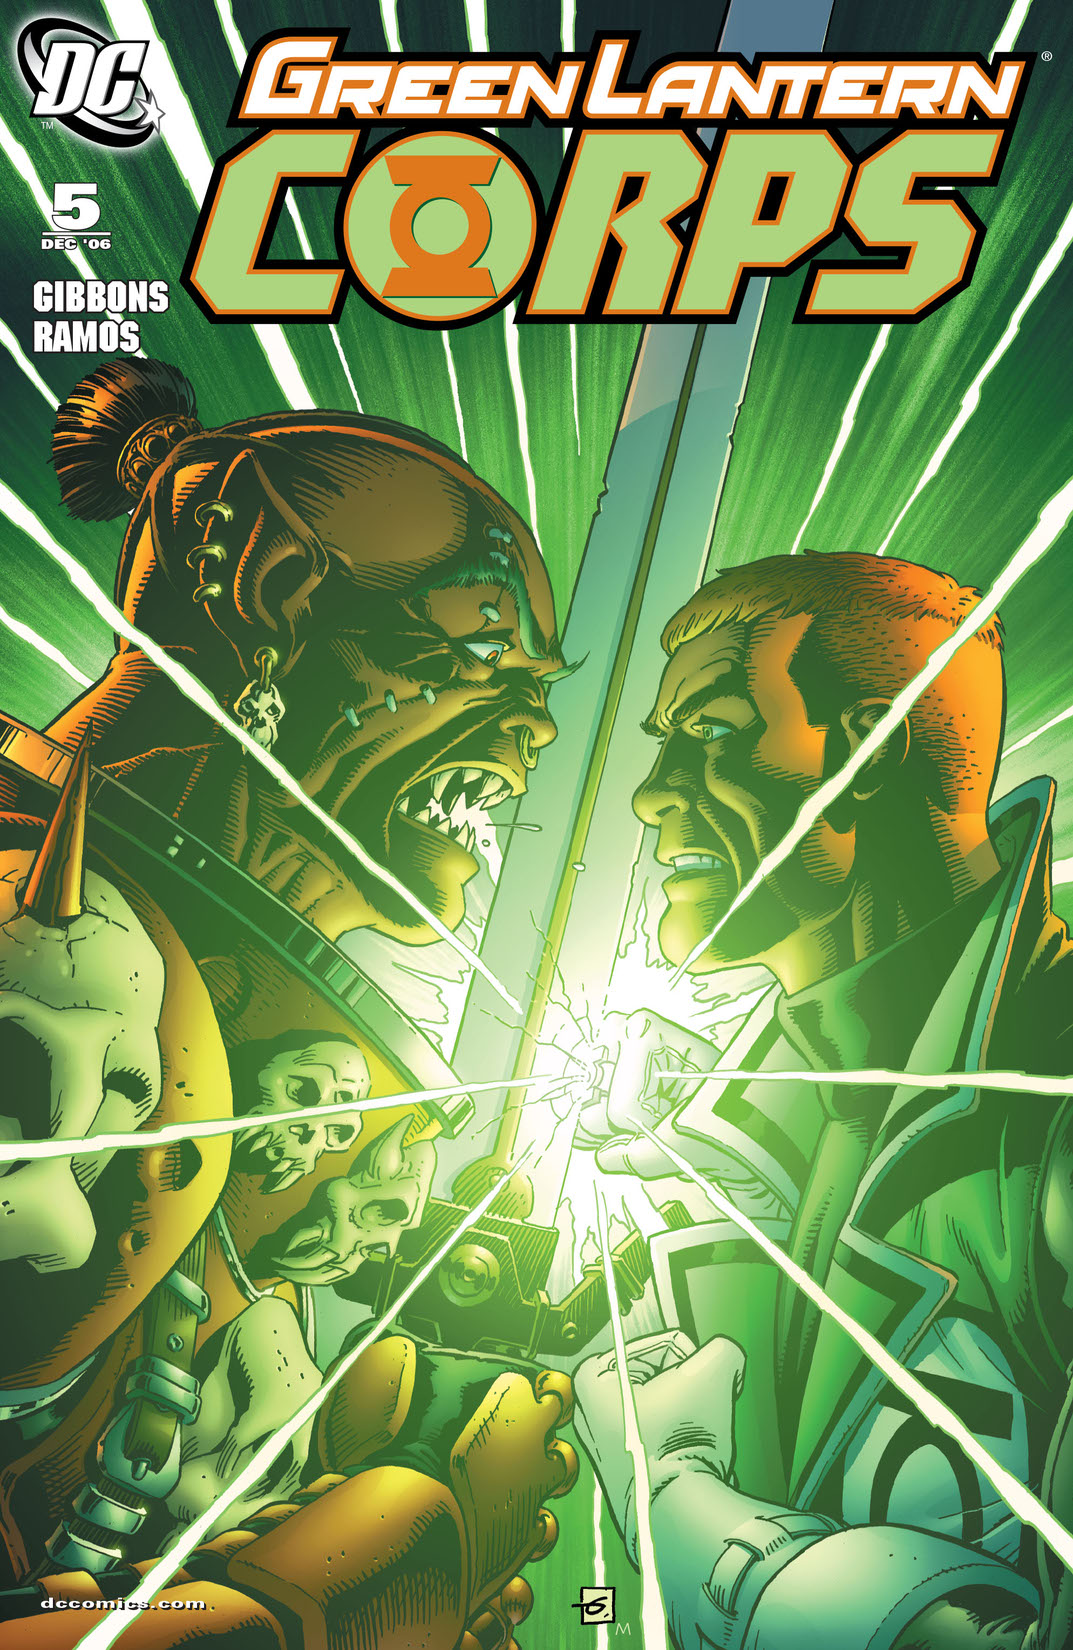 Green Lantern Corps (2006-) #5 preview images